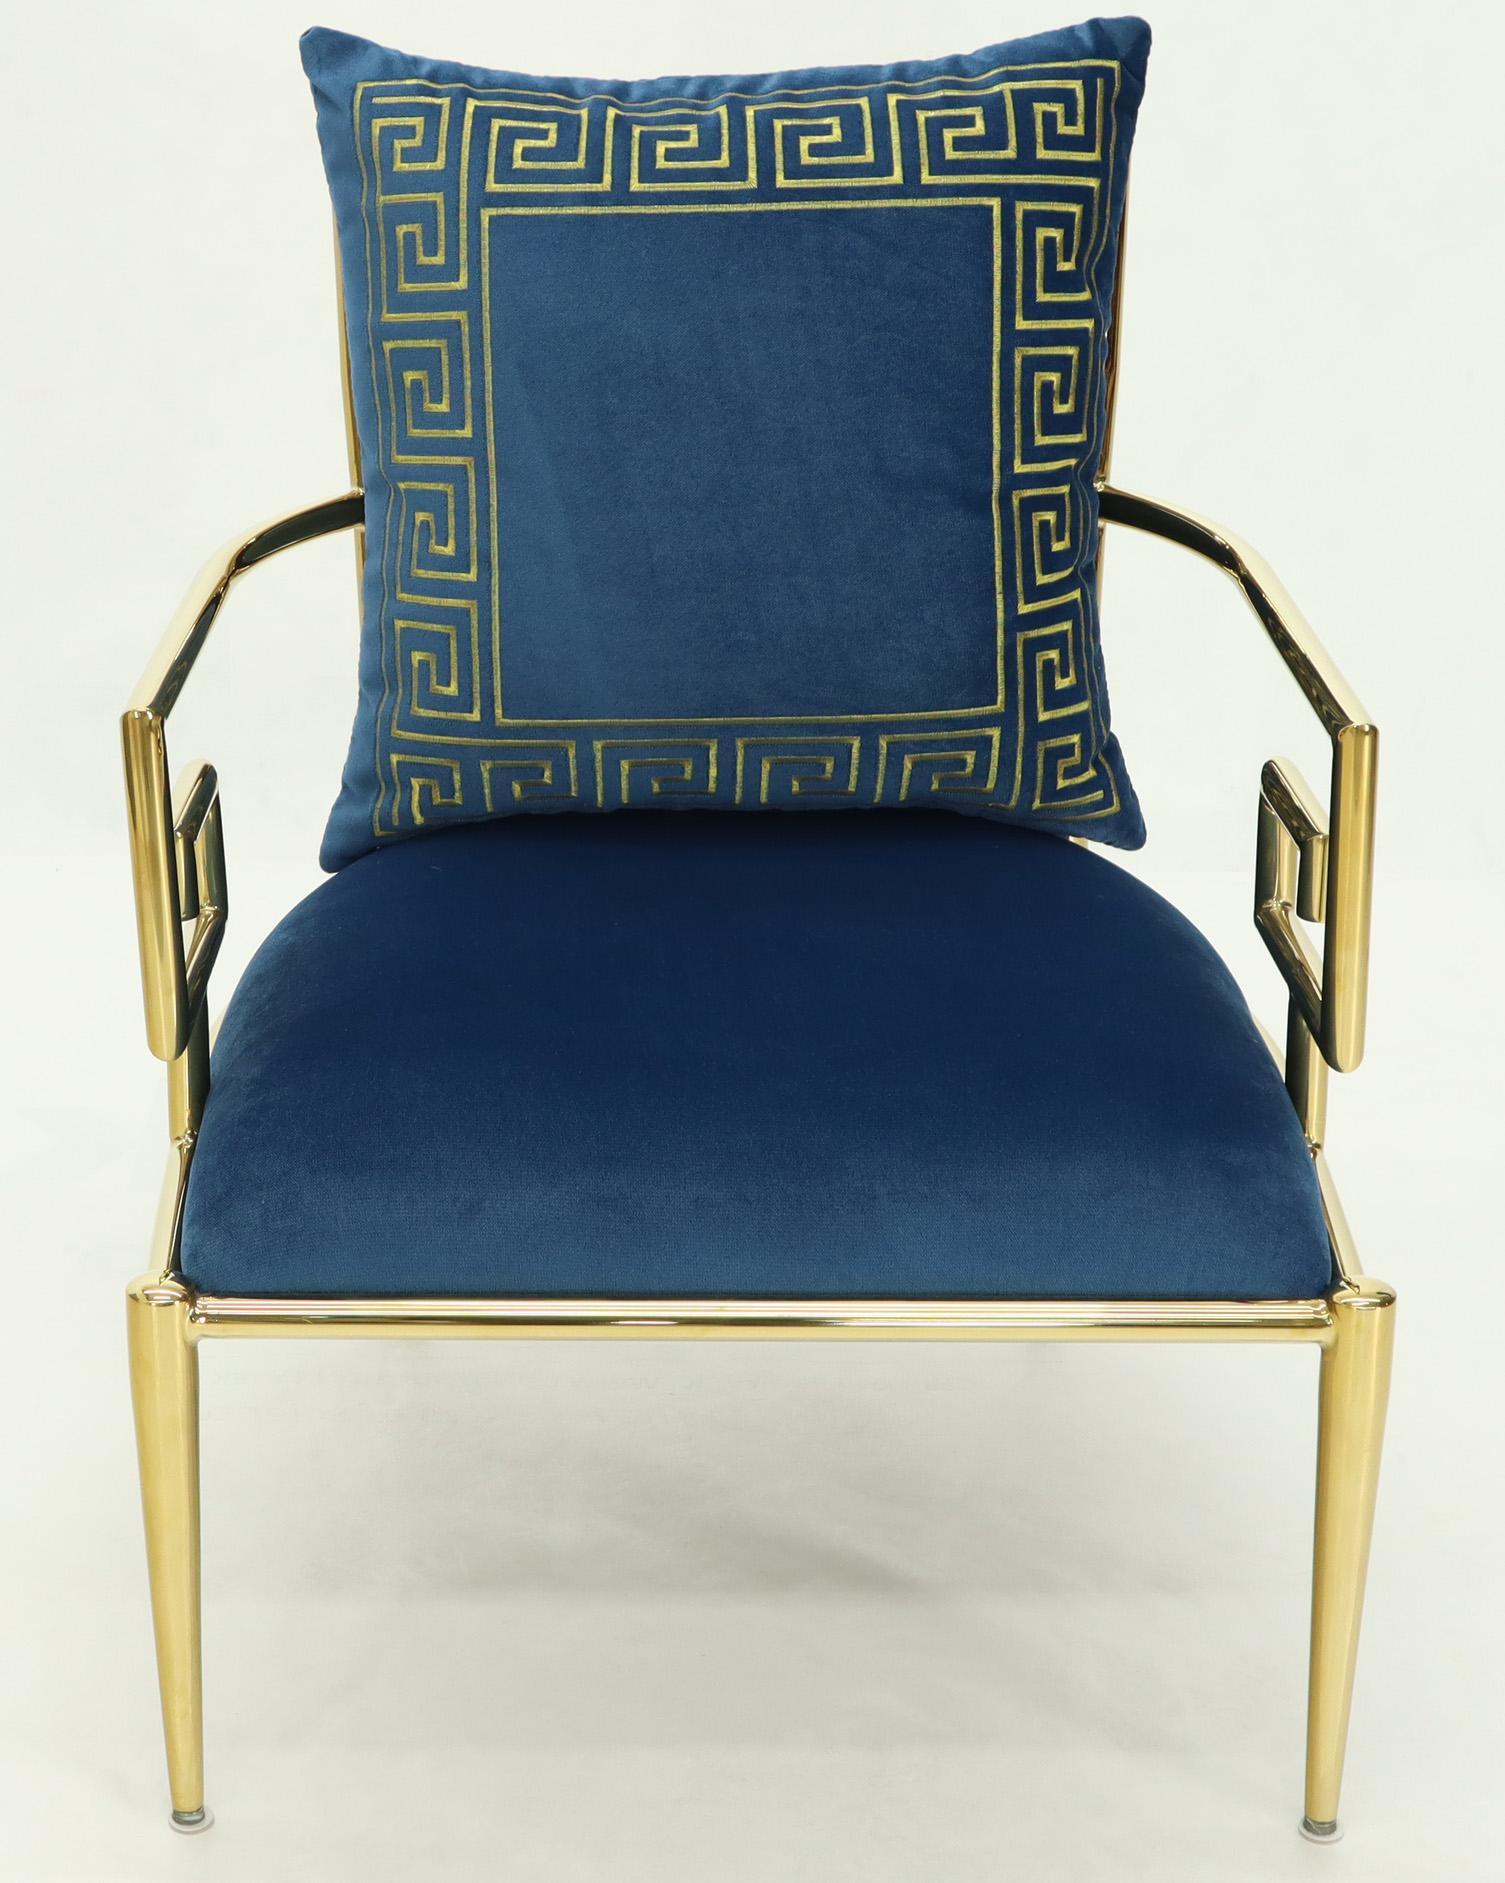 Contemporary Pair of Greek Key Brass and Blue Velvet Lounge Chairs